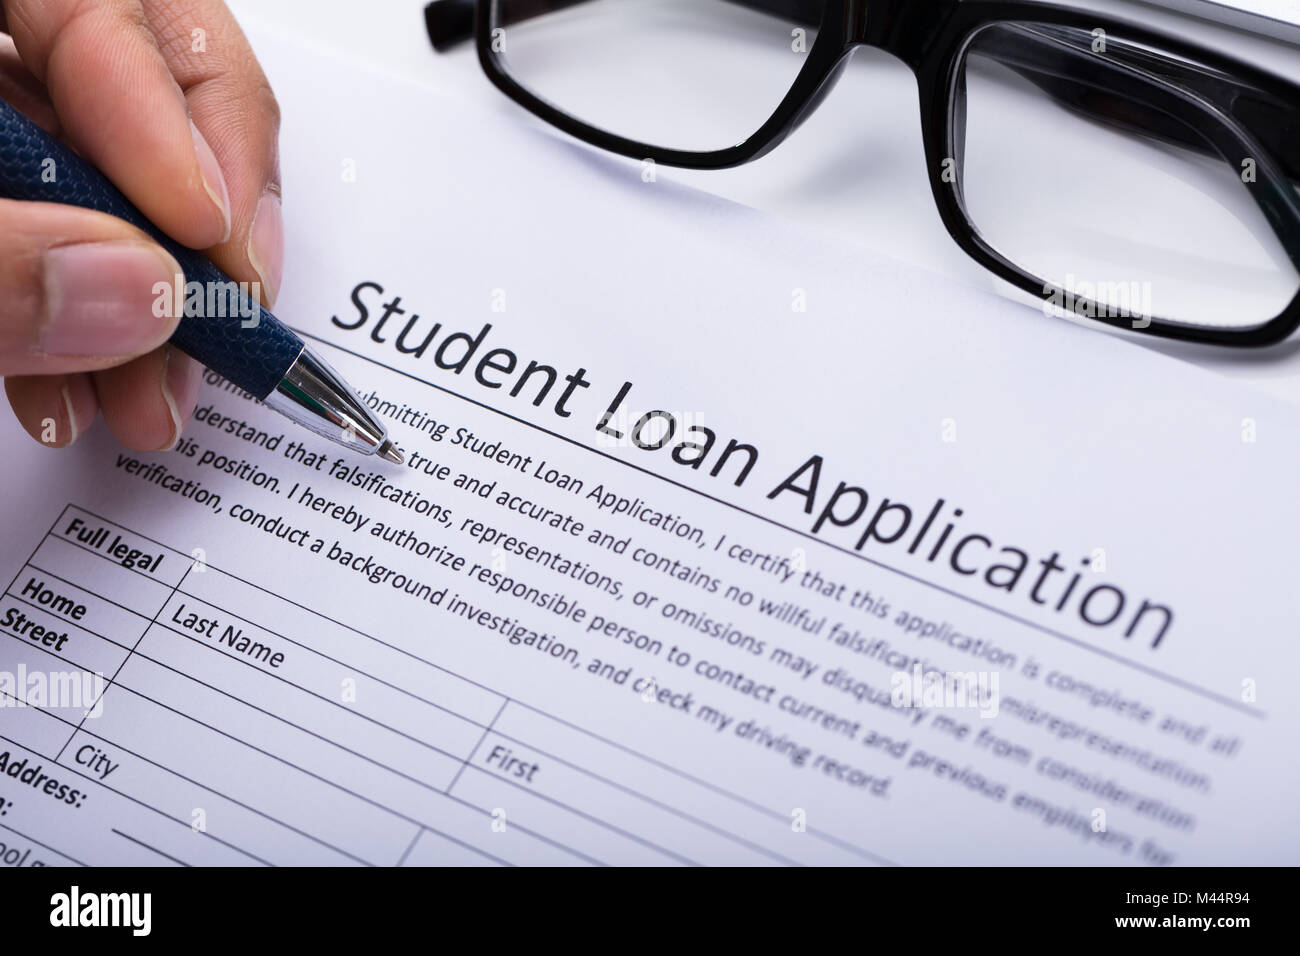 Close-up Of A Person's Hand Filling Student Loan Application Form Stock Photo